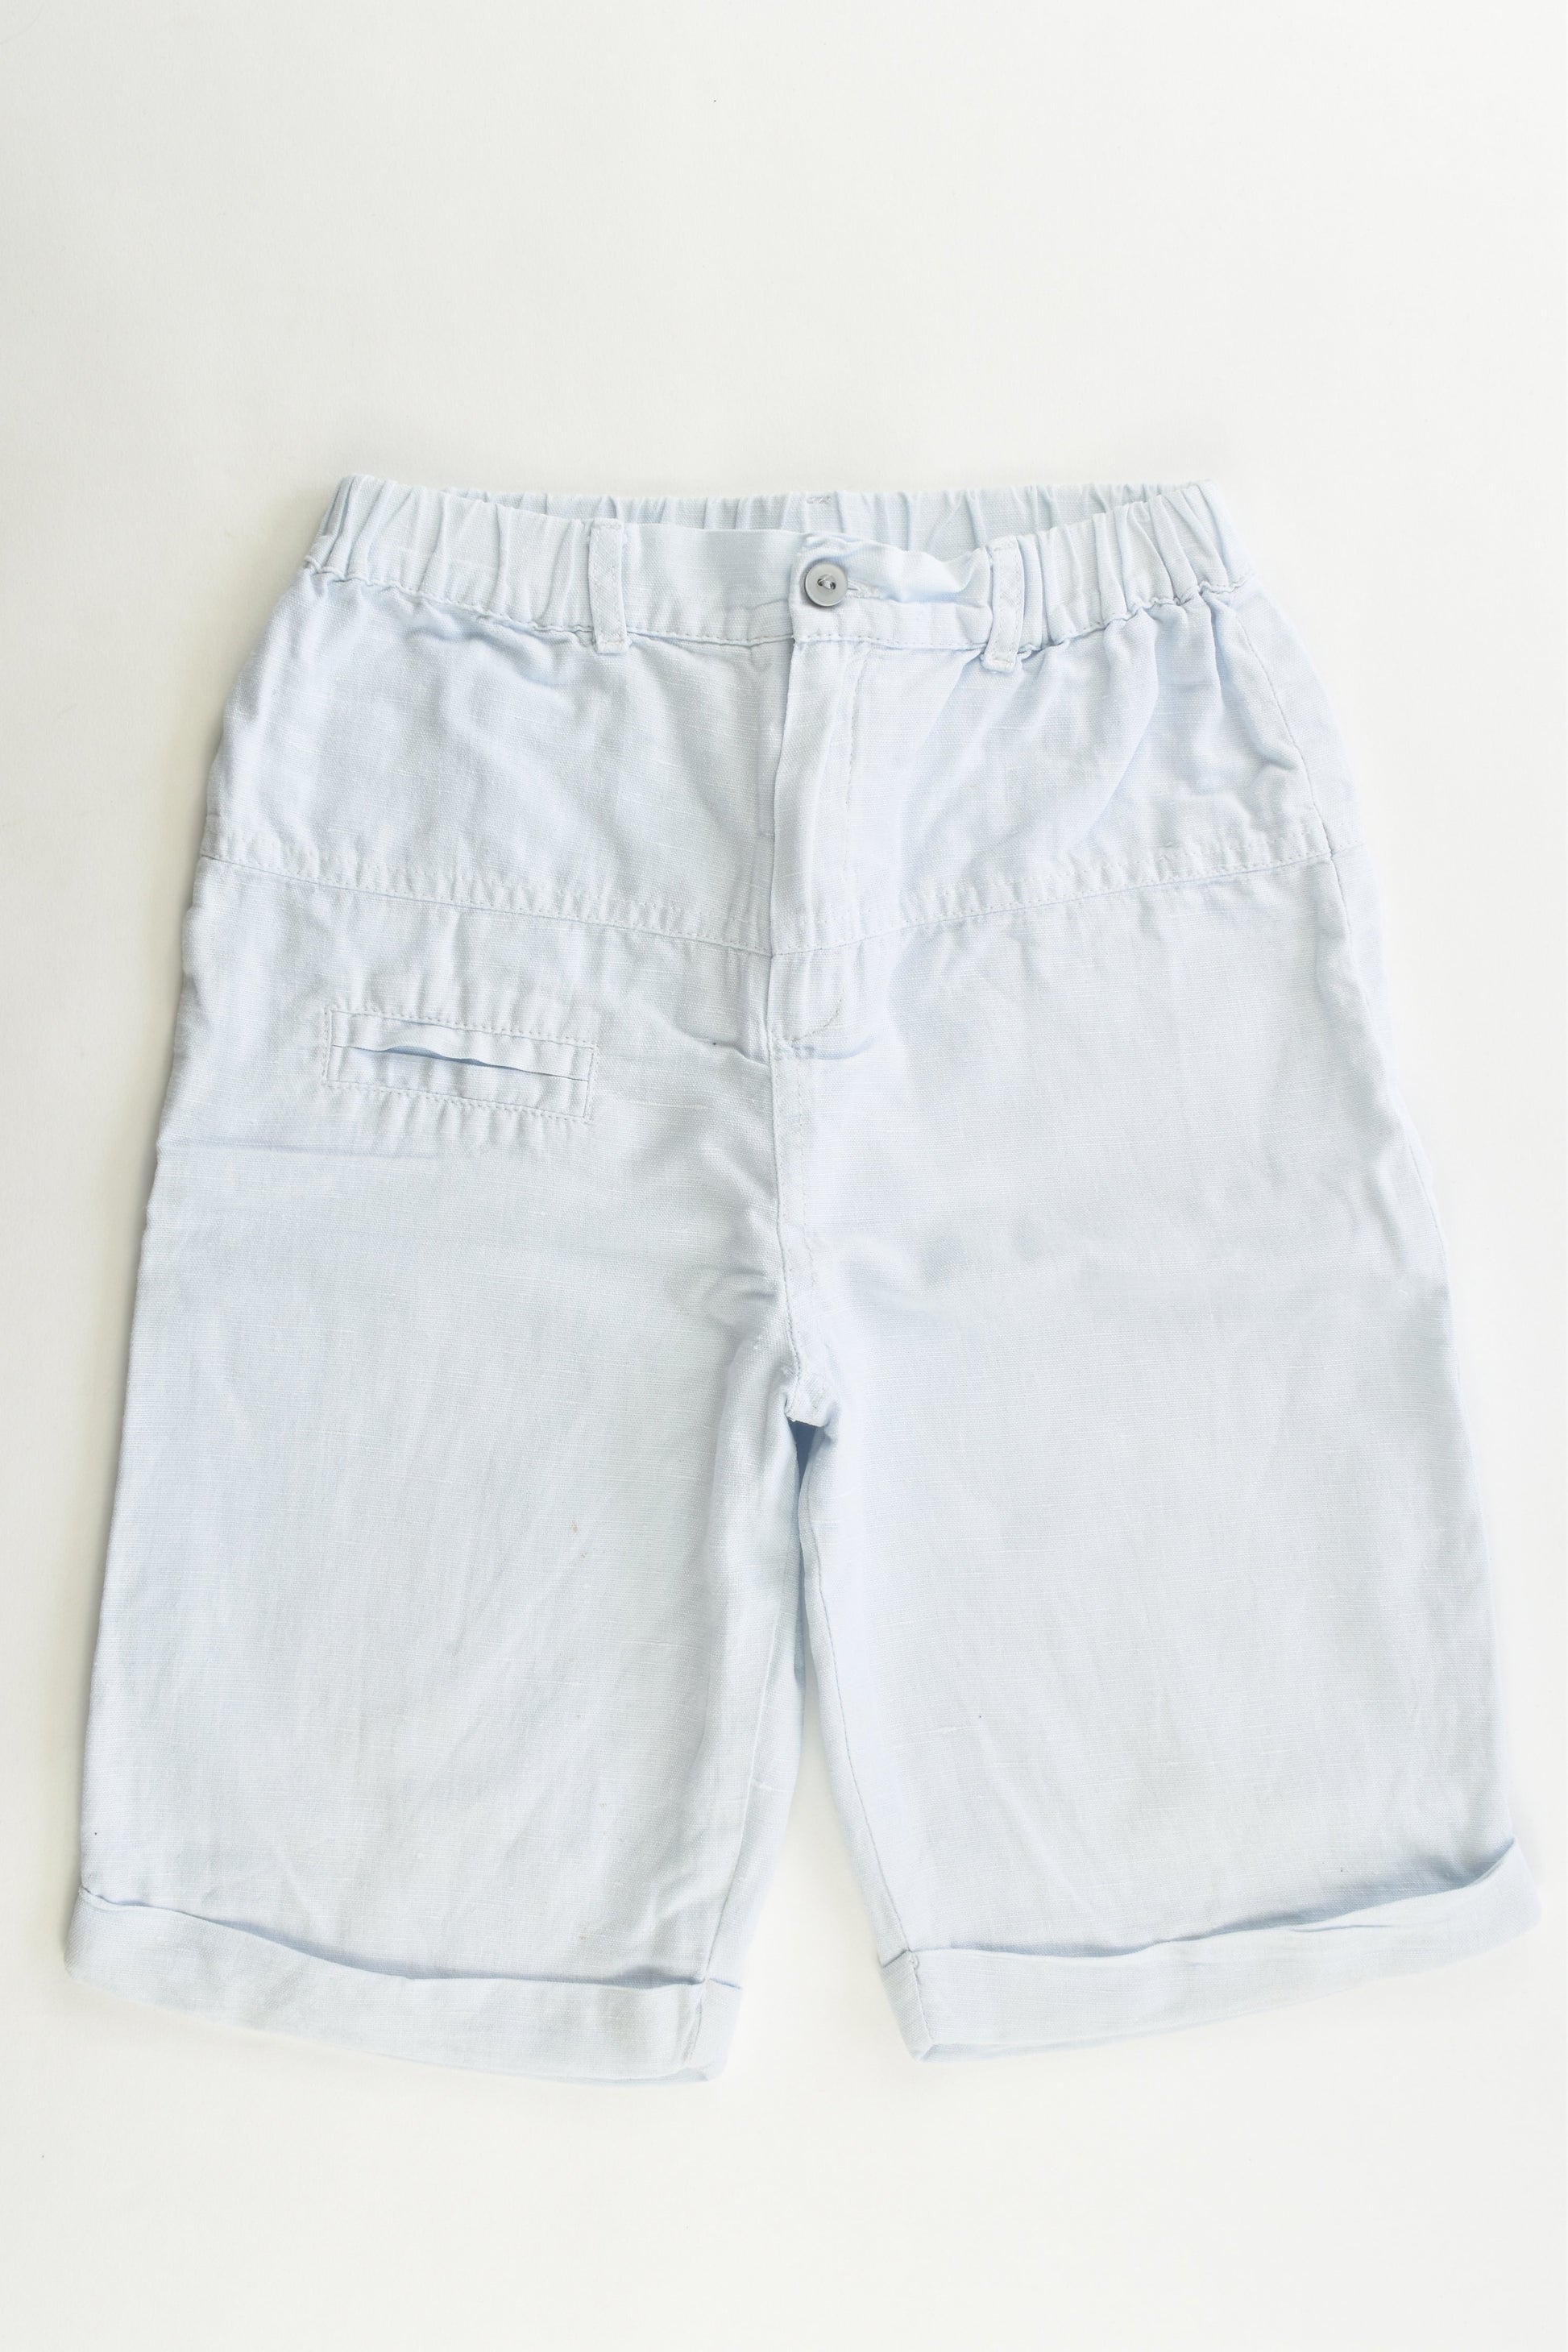 Brand Unknown Size approx 5/6 Lined Linen/Cotton Shorts